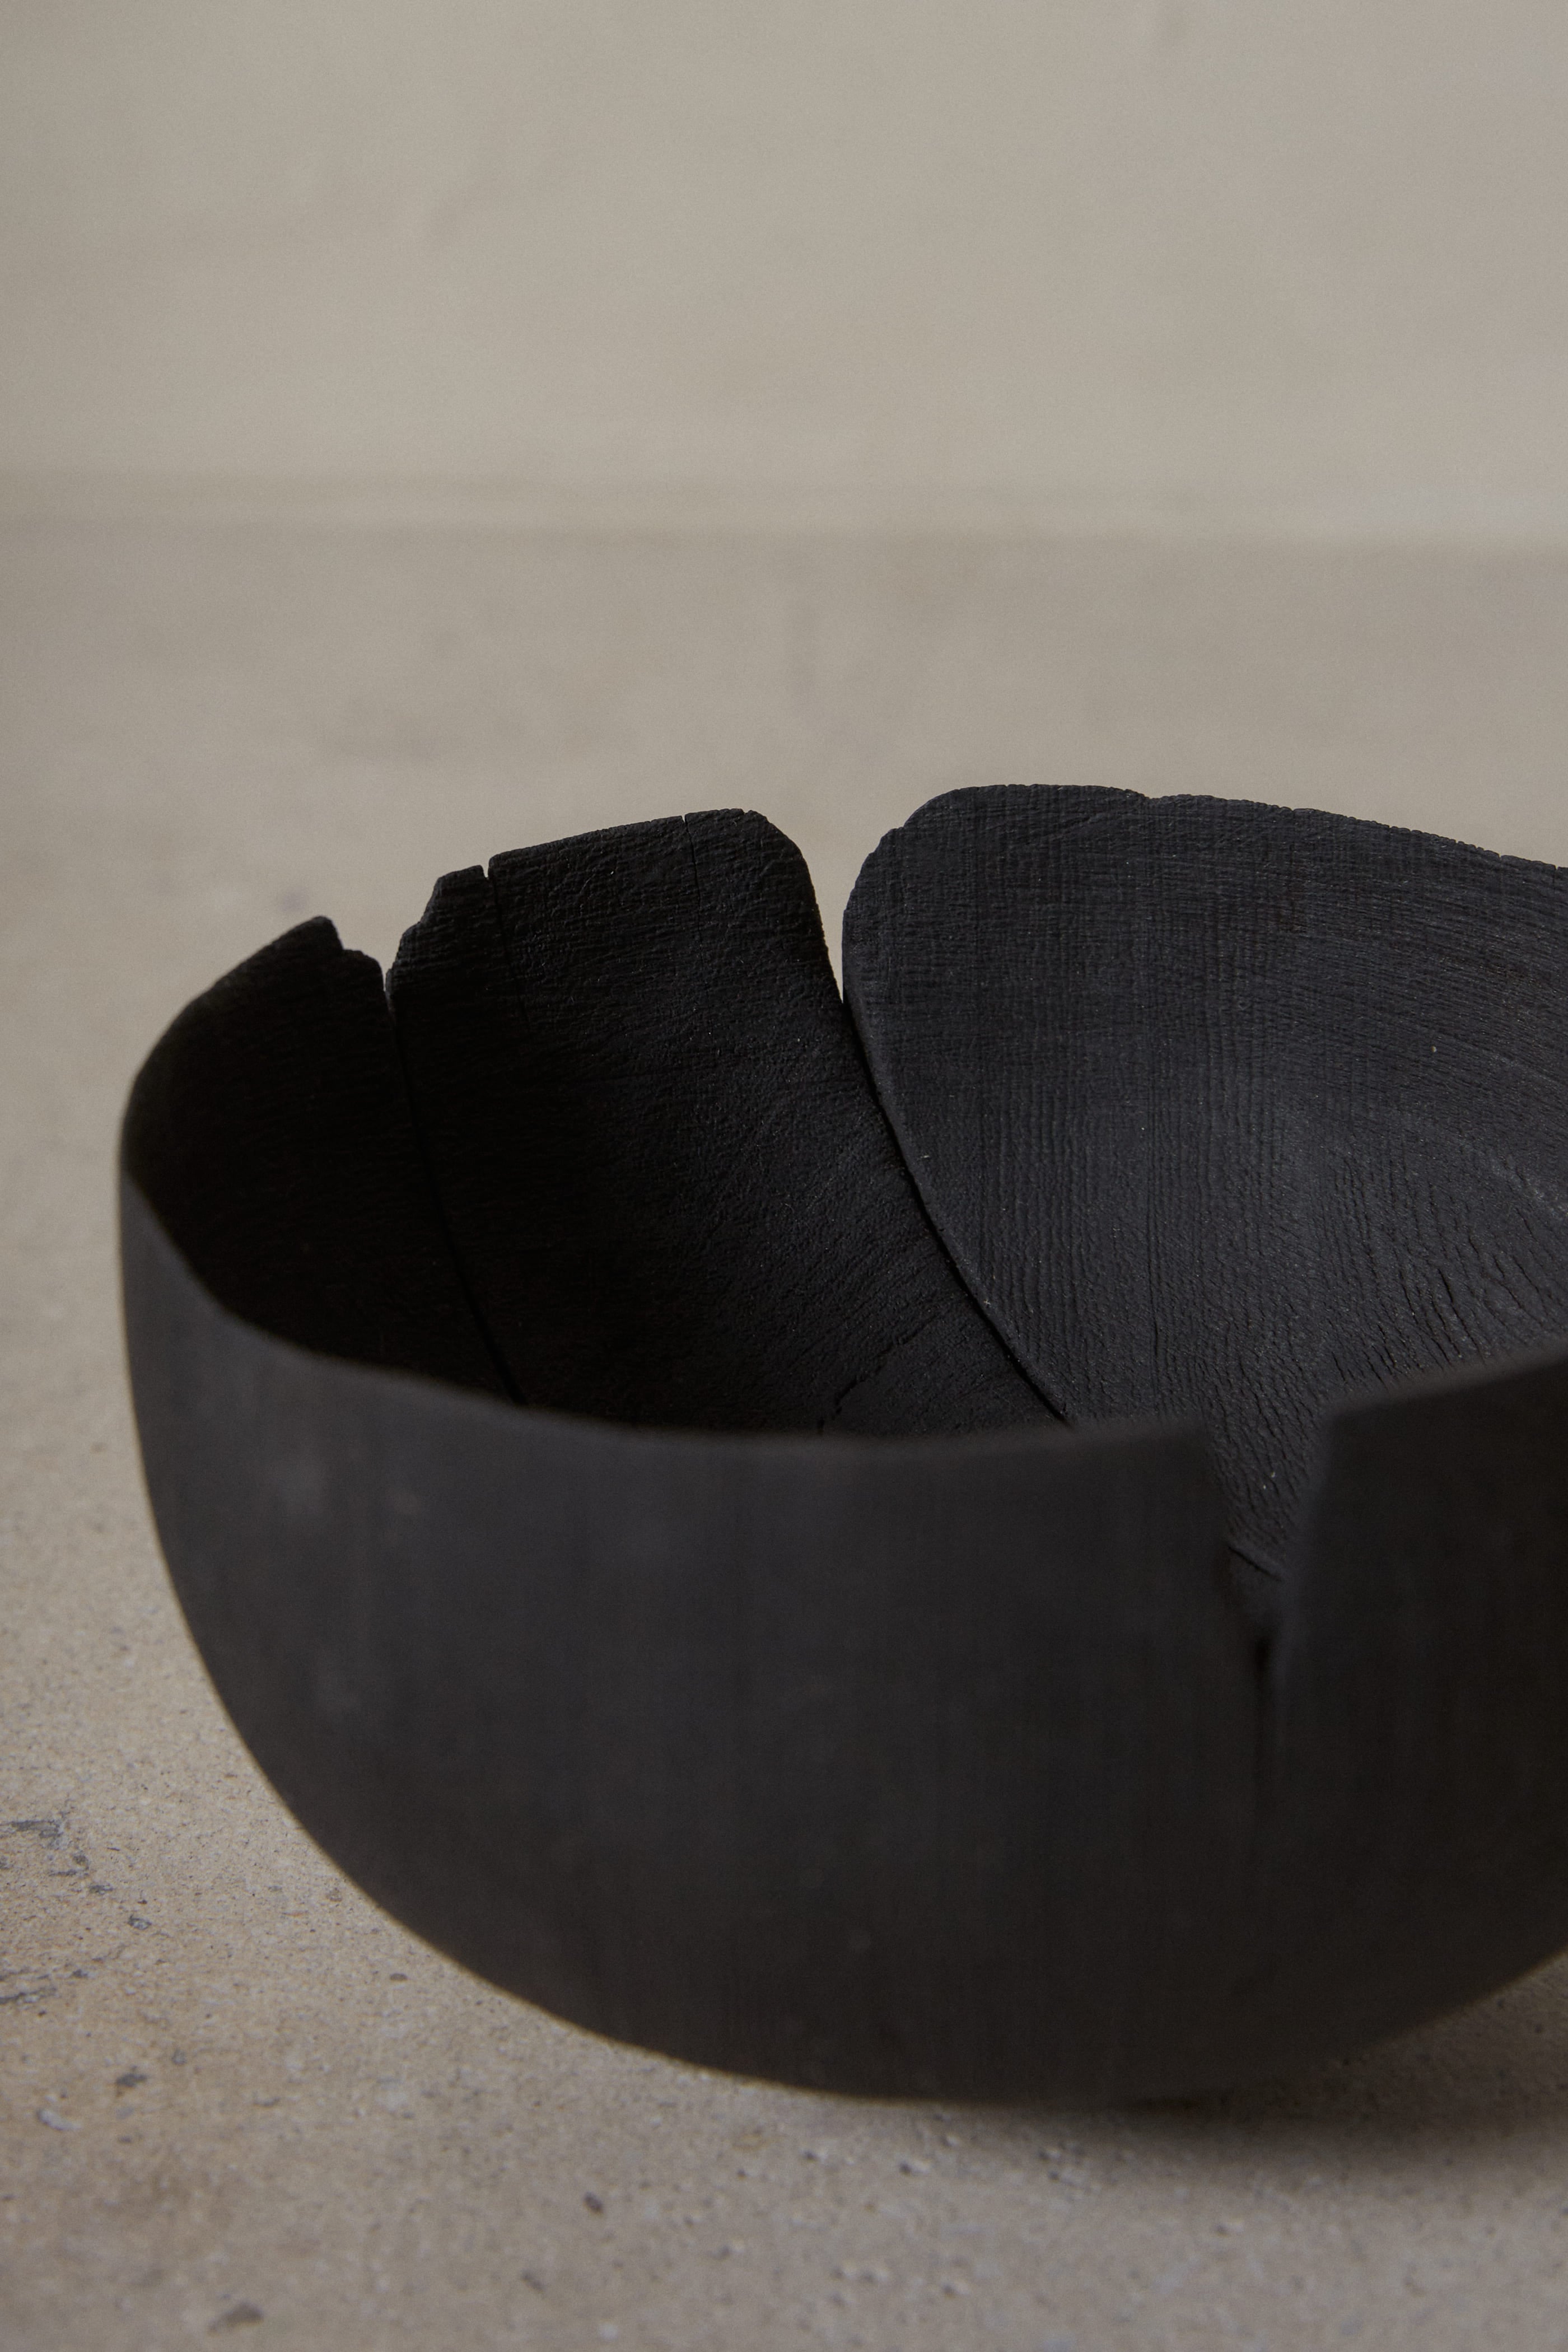 Interior texture and details on footed black Yakisugi Bowl from CARMWORKS.